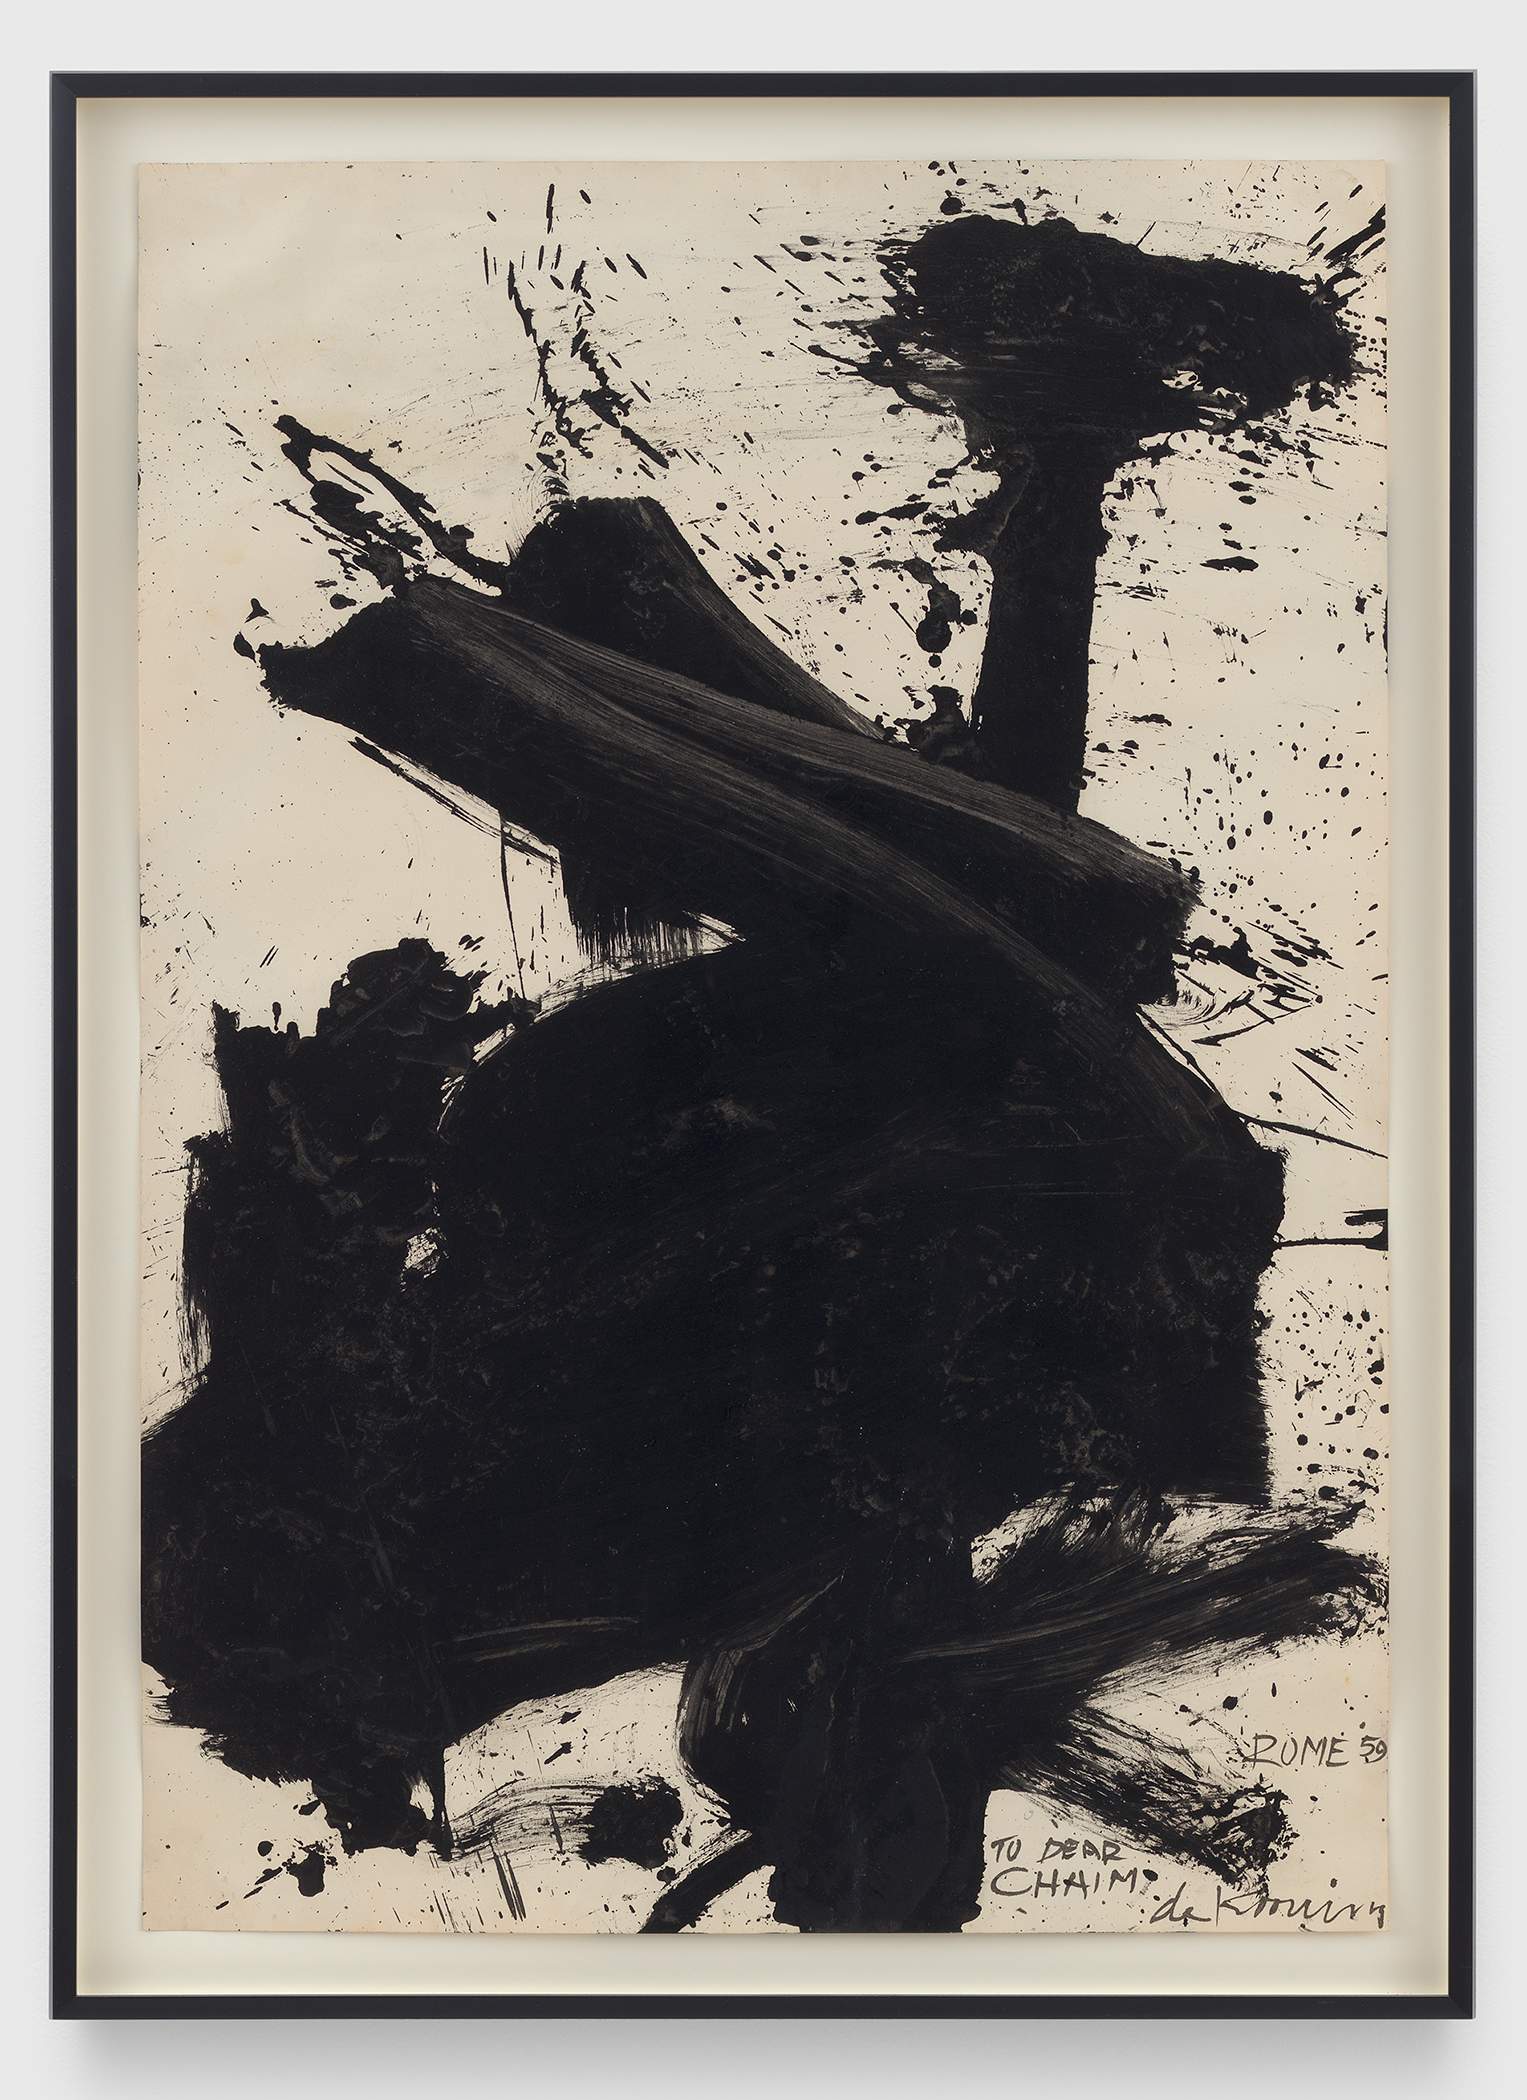 02_willem-de-kooning_untitled-rome-_1959_the-renee-and-chaim-gross-foundation.jpg